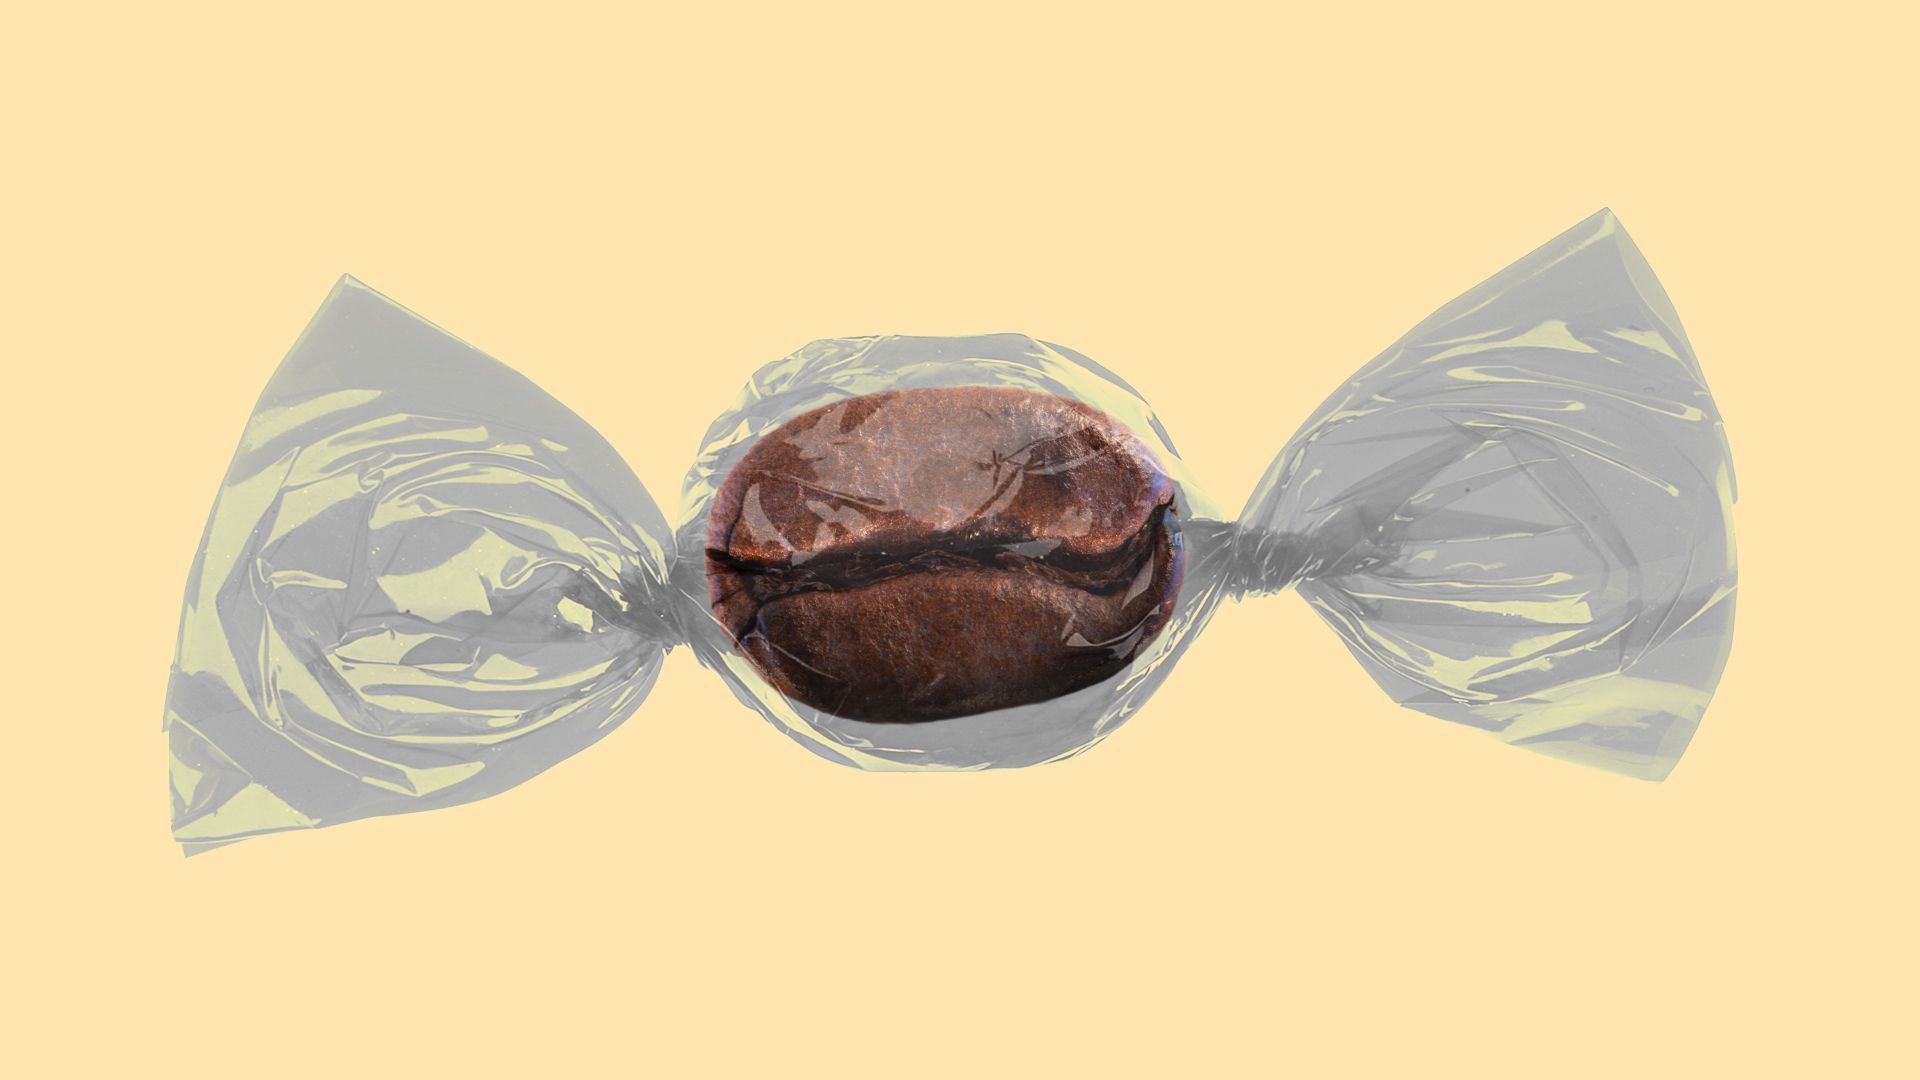 An illustration of a coffee bean in a candy wrapper.